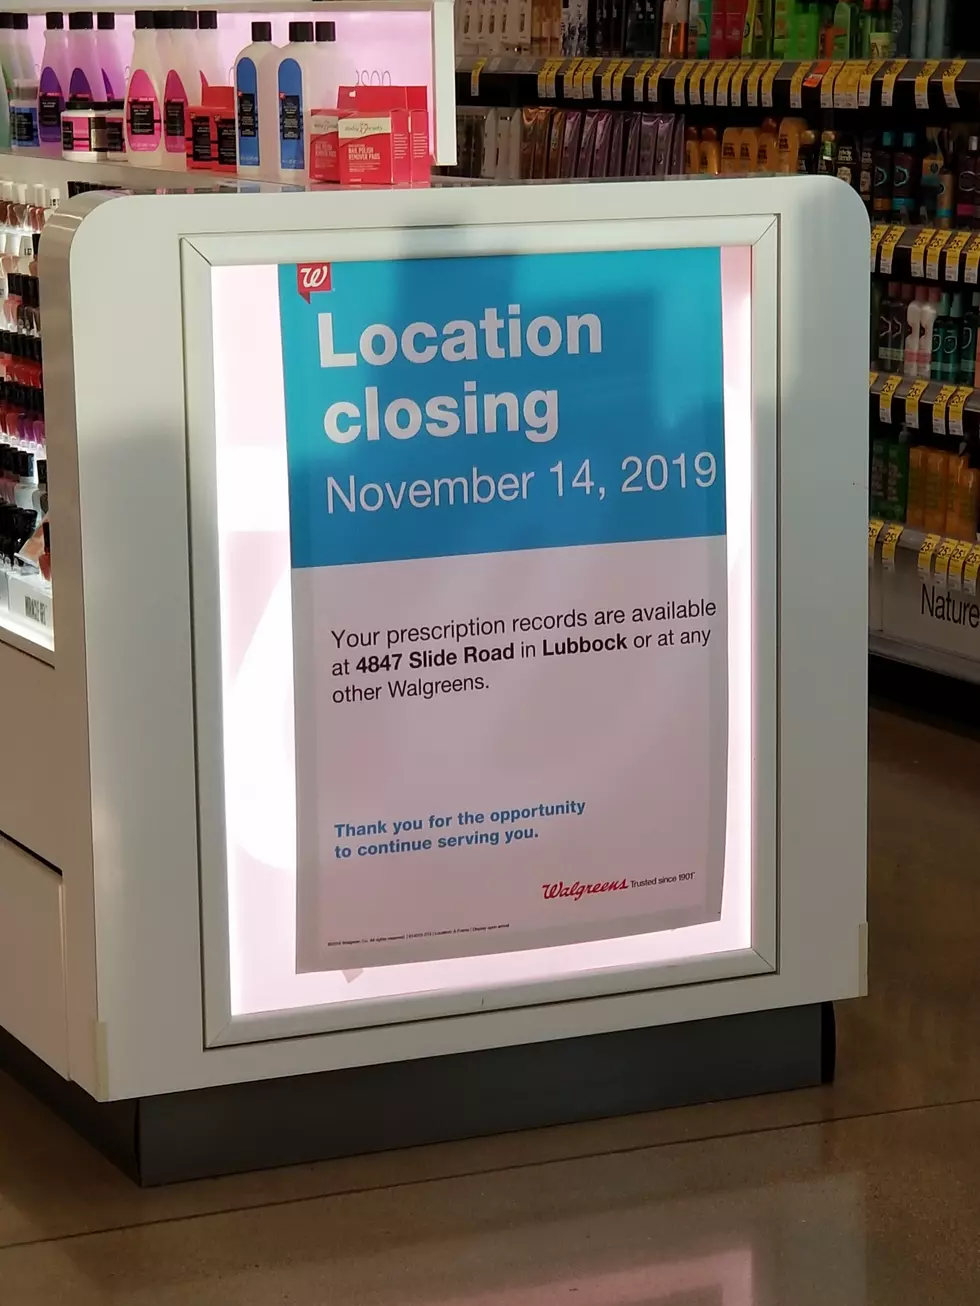 Walgreens at 3009 Slide Is Closing Permanently, Clearance Items Now Available